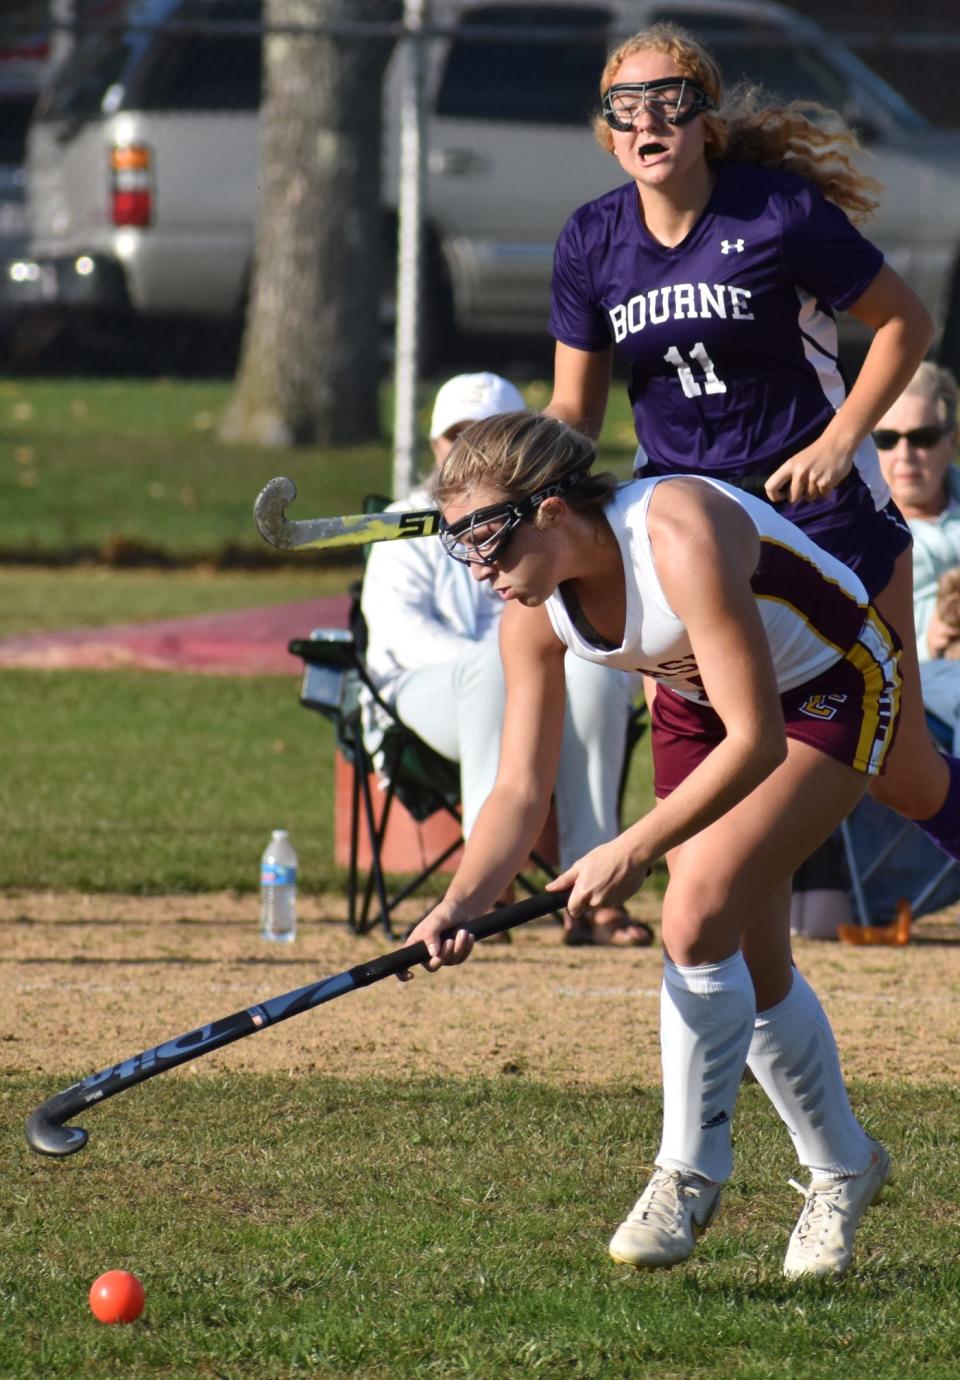 Case's Megan Smith runs after the ball against Bourne in their field hockey game in Swansea on Wednesday.